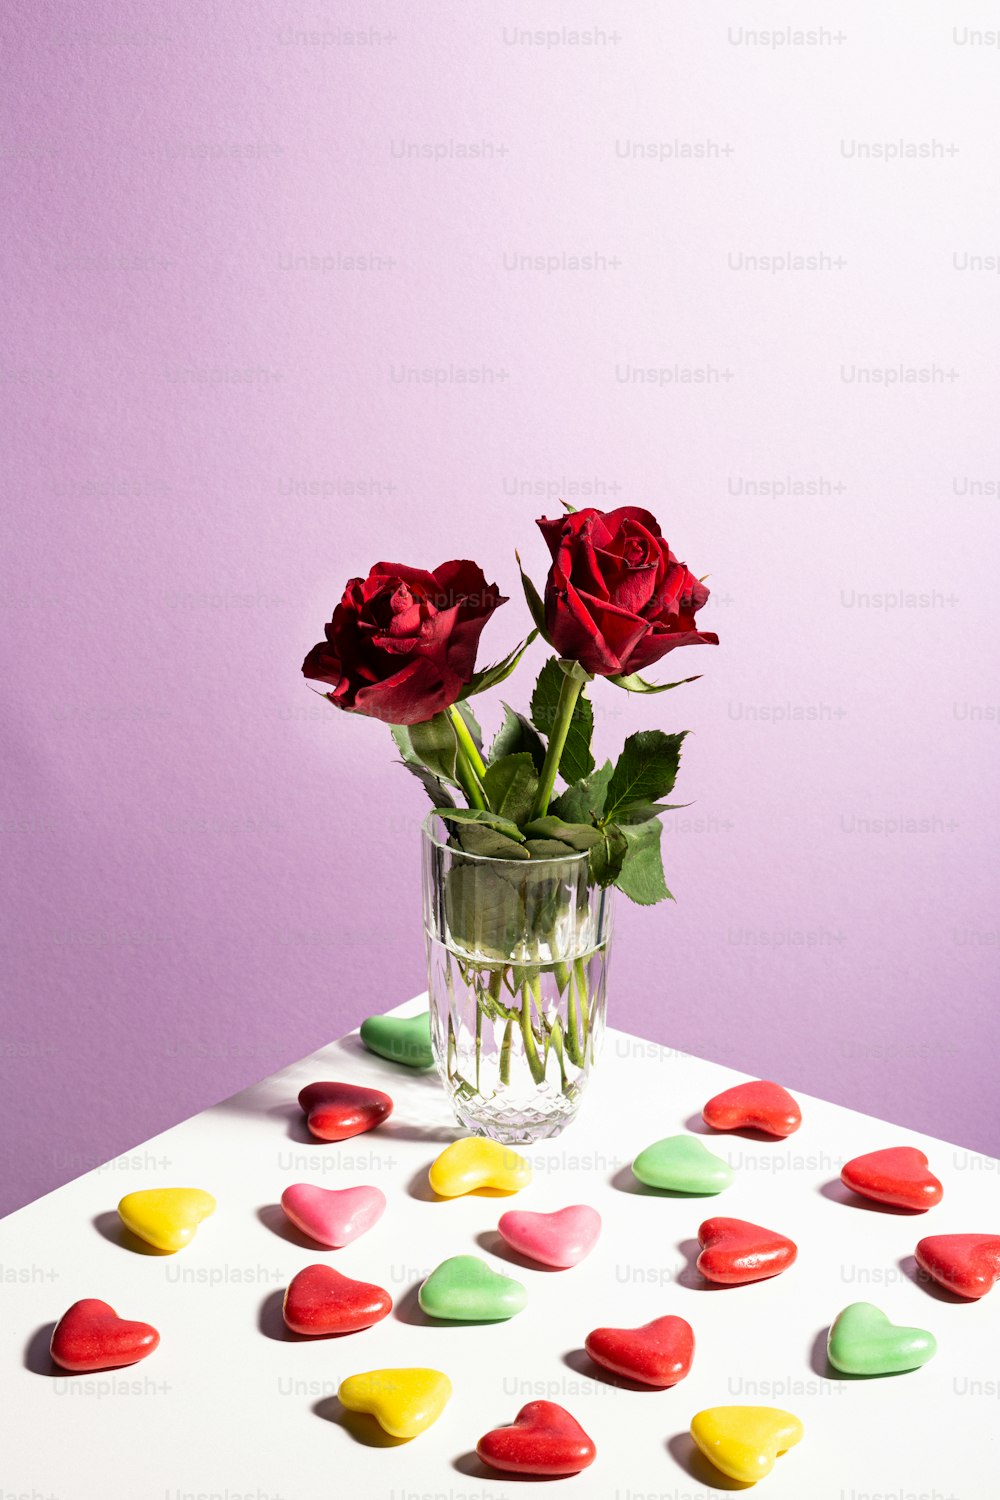 a vase filled with red roses sitting on top of a table